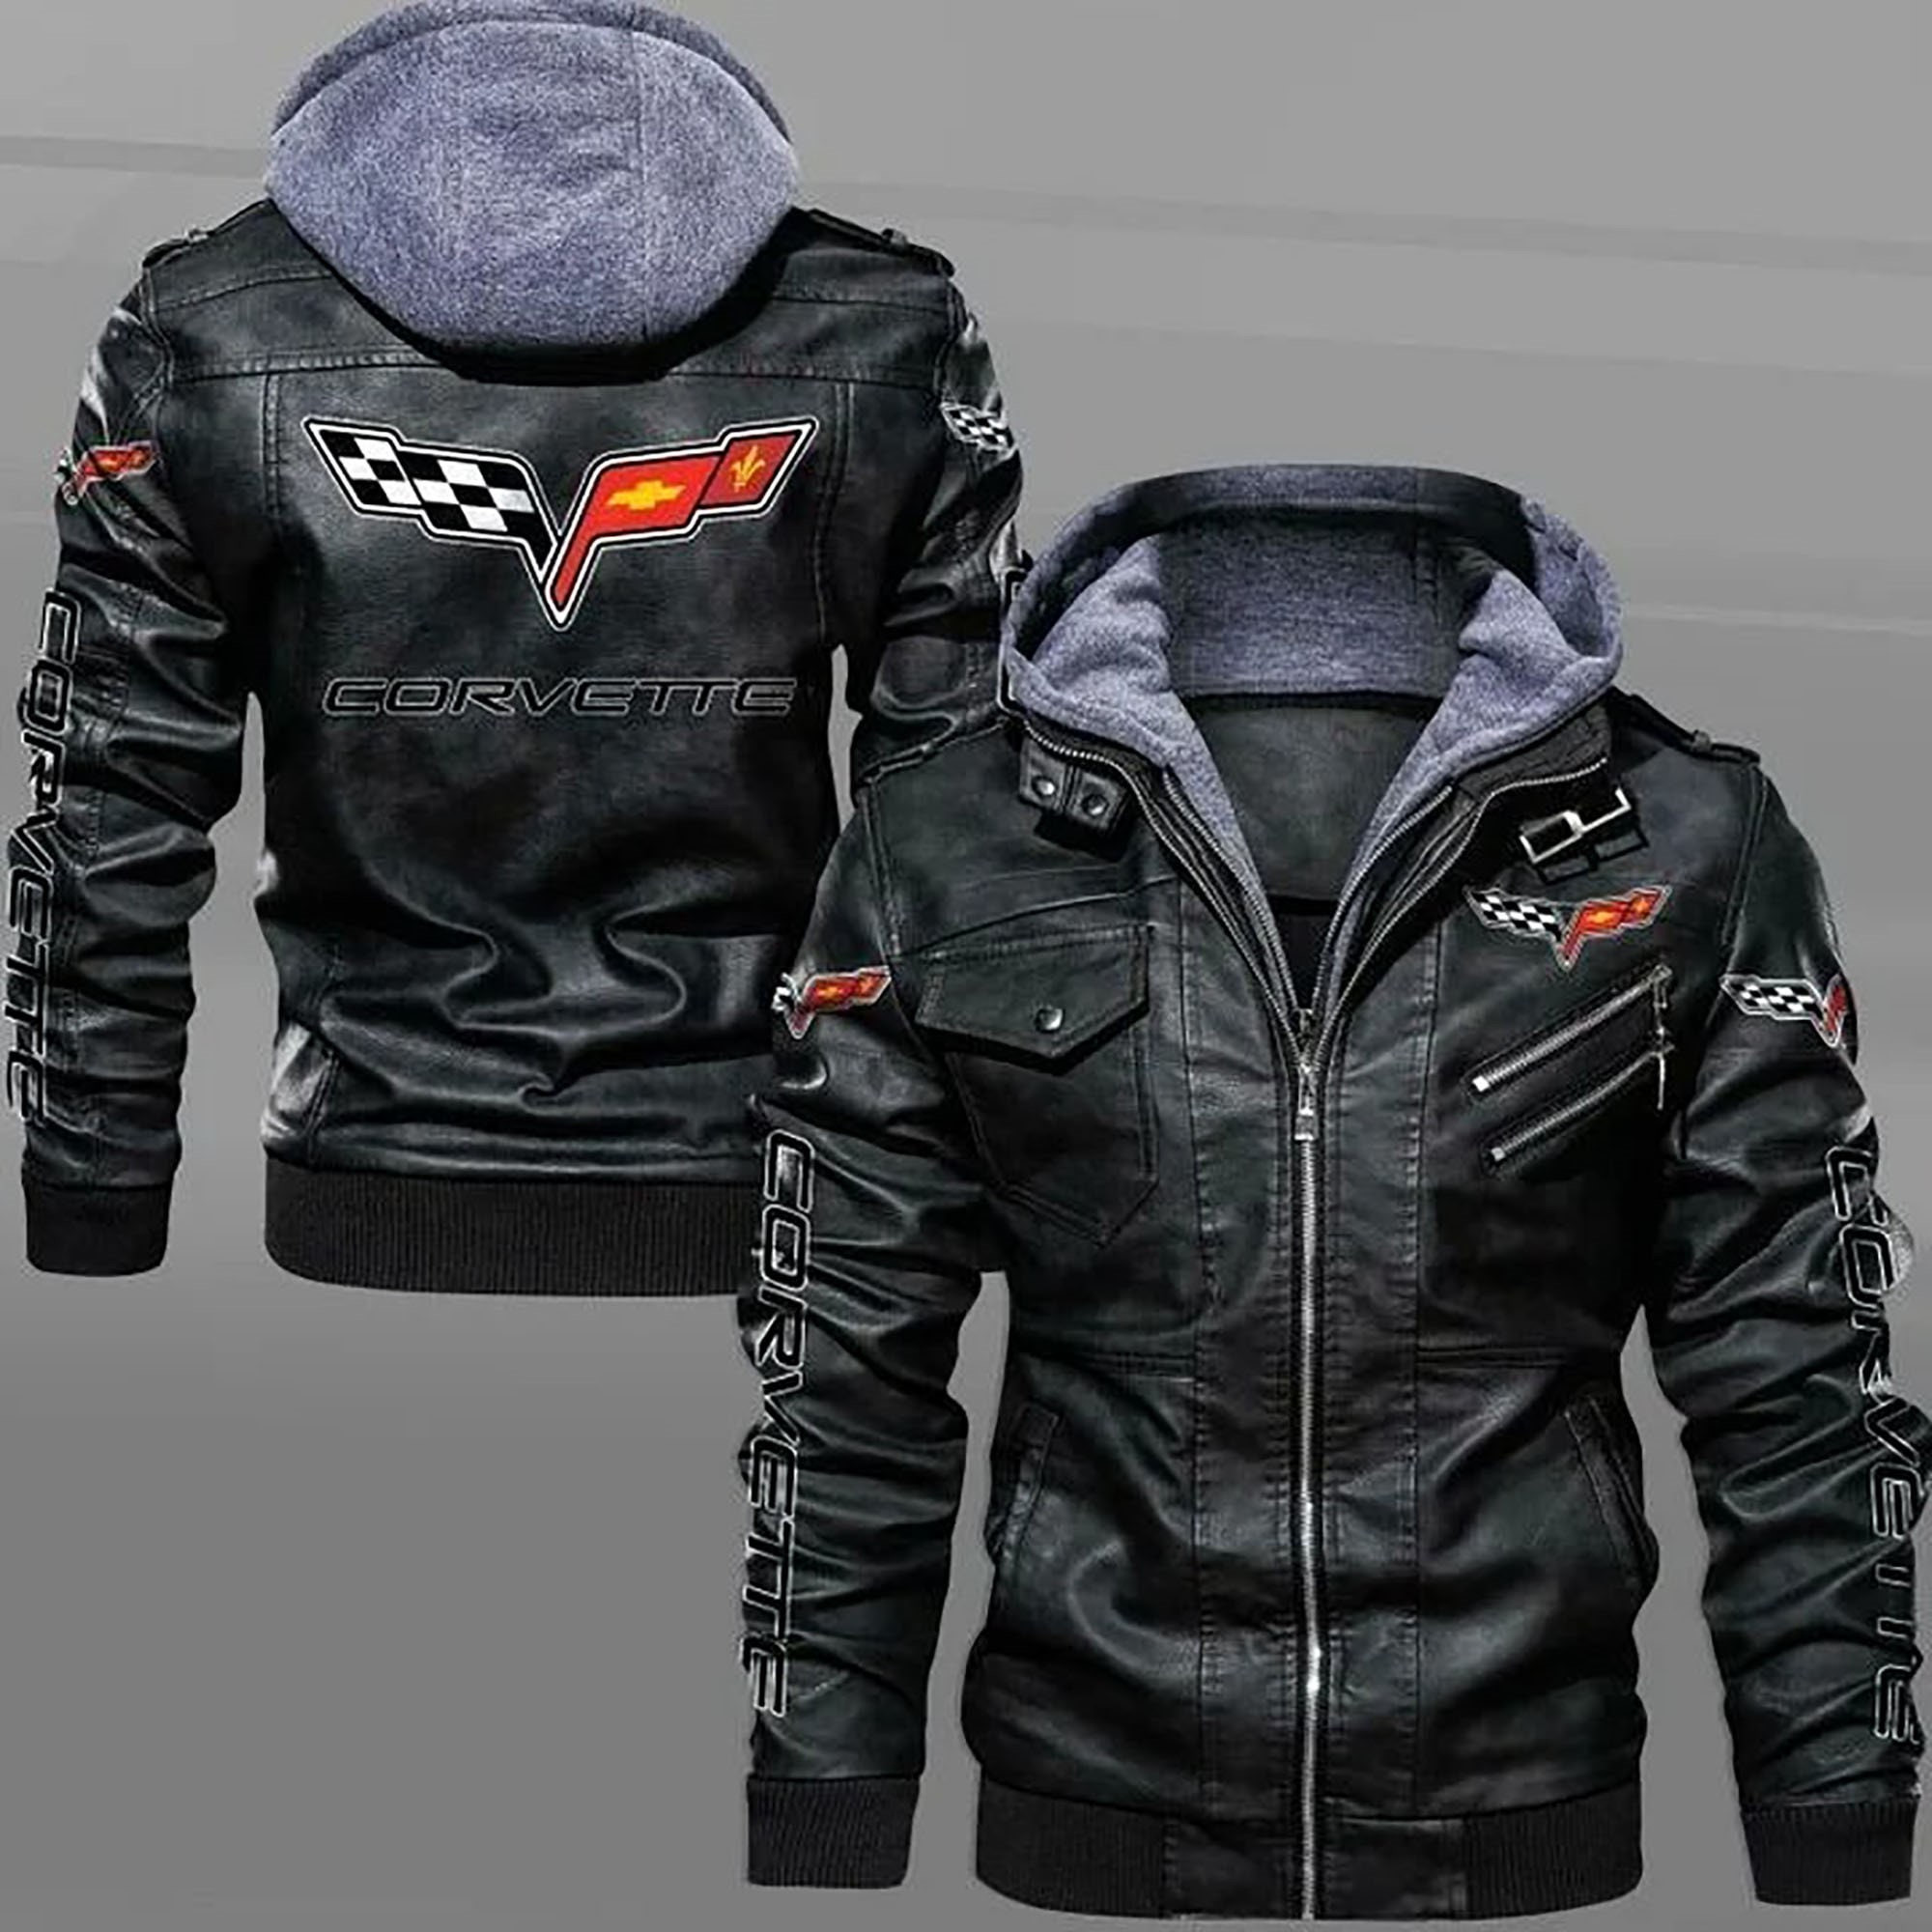 These Amazing Leather Jacket will add to the appeal of your outfit 213